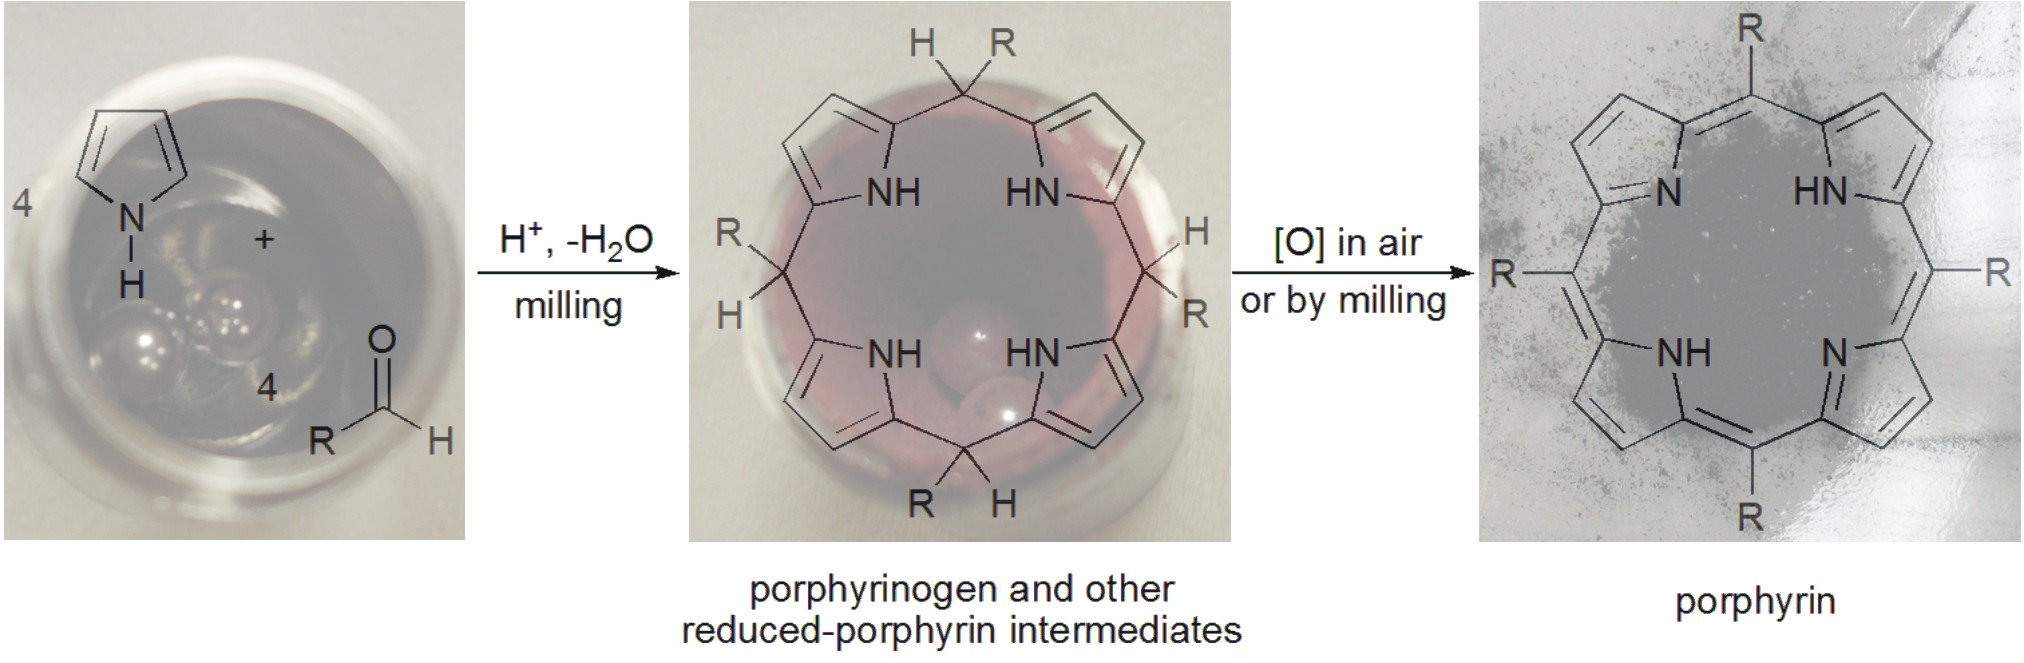 Solvent-free Synthesis of Porphyrins